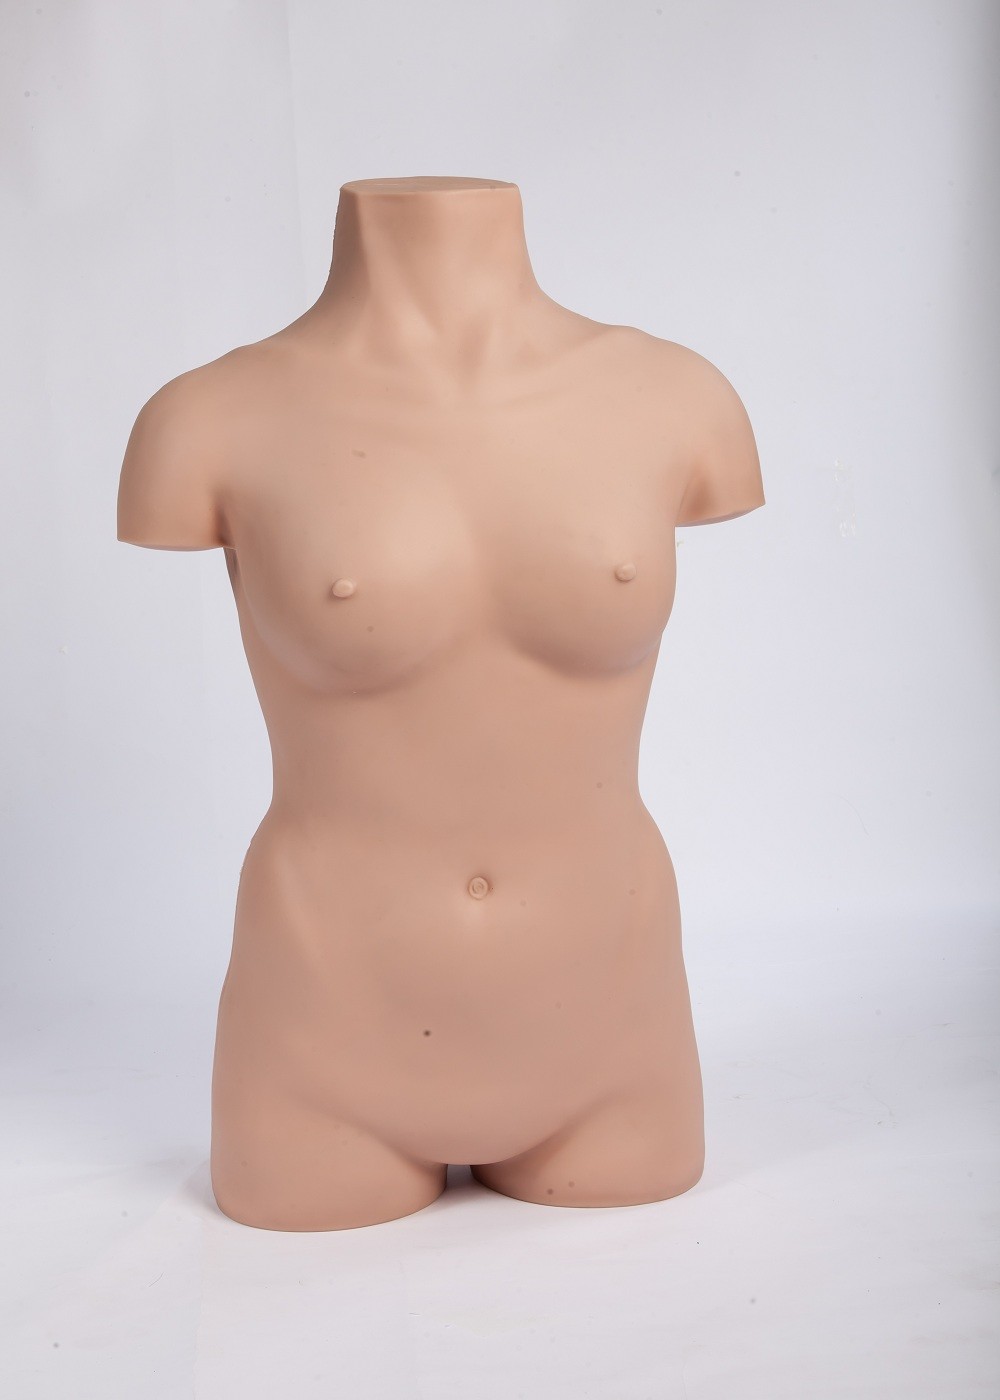 Realistic Female body aseptic operation Surgical Training Models for education